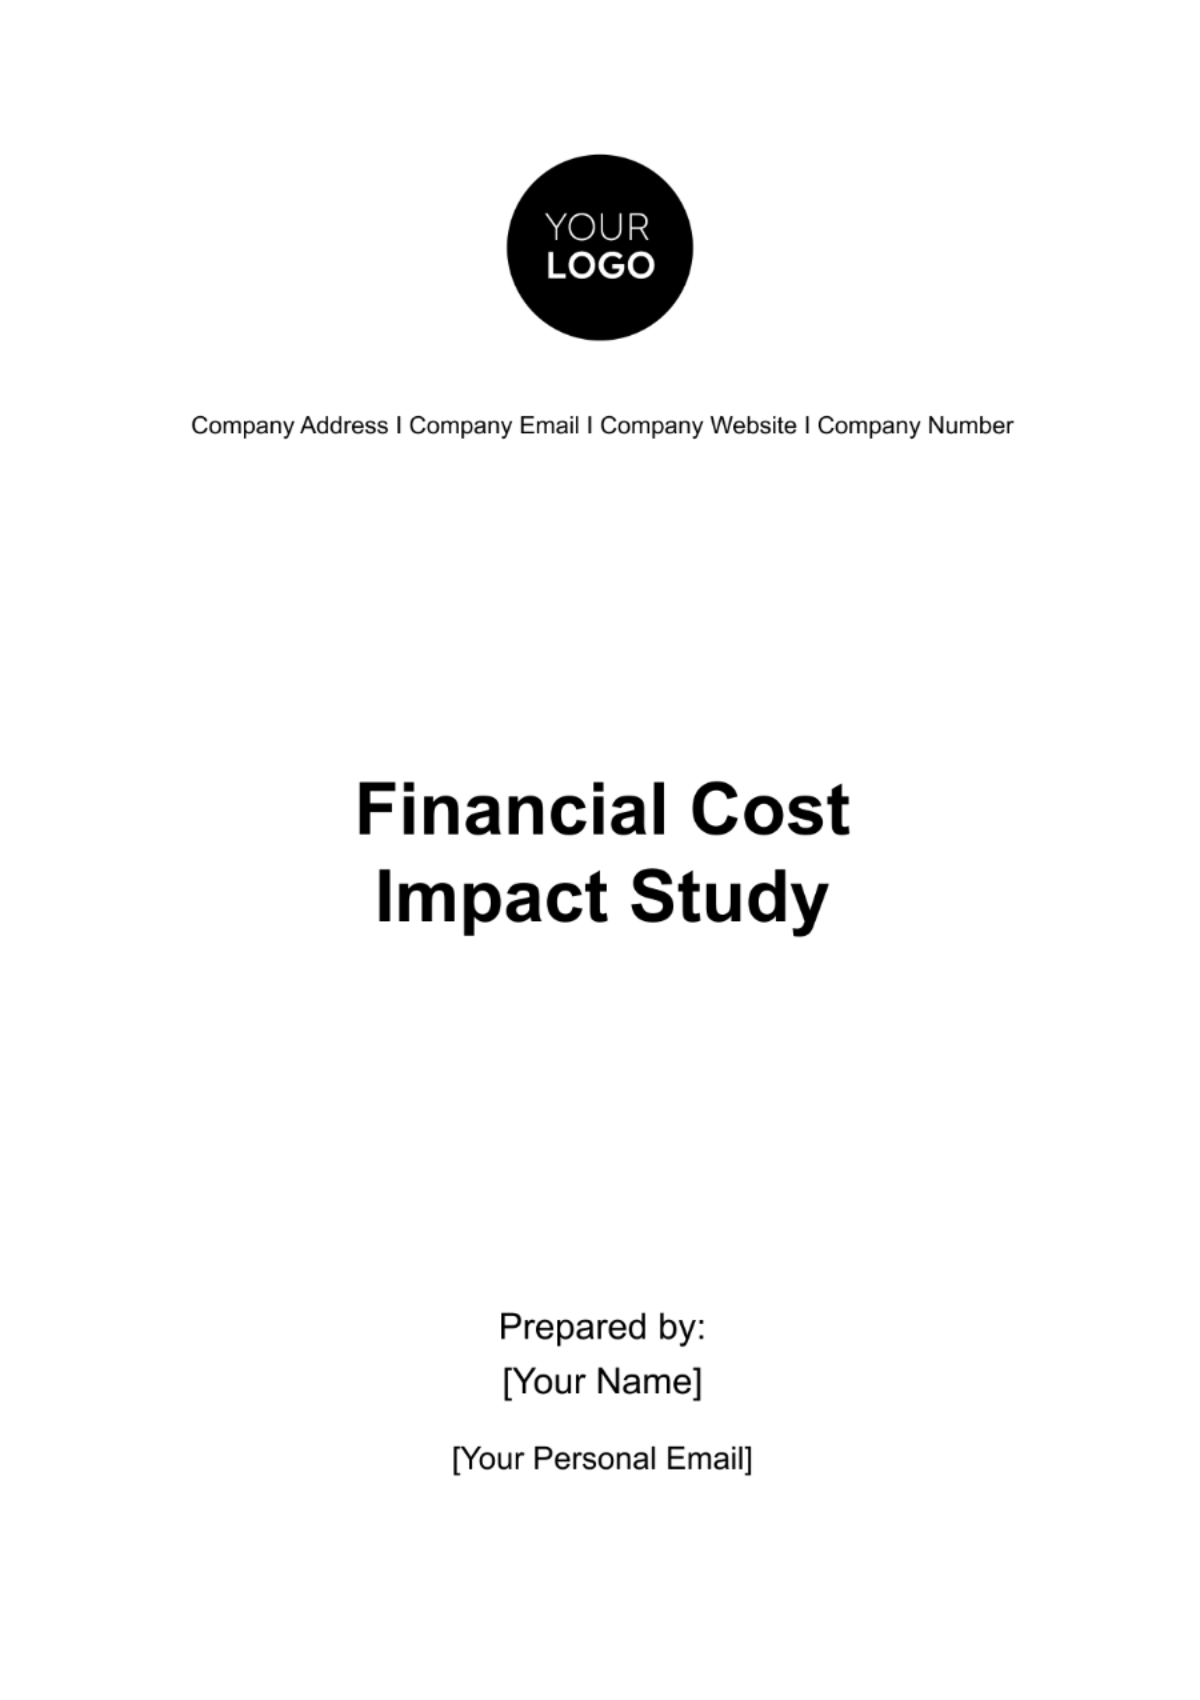 Financial Cost Impact Study Template